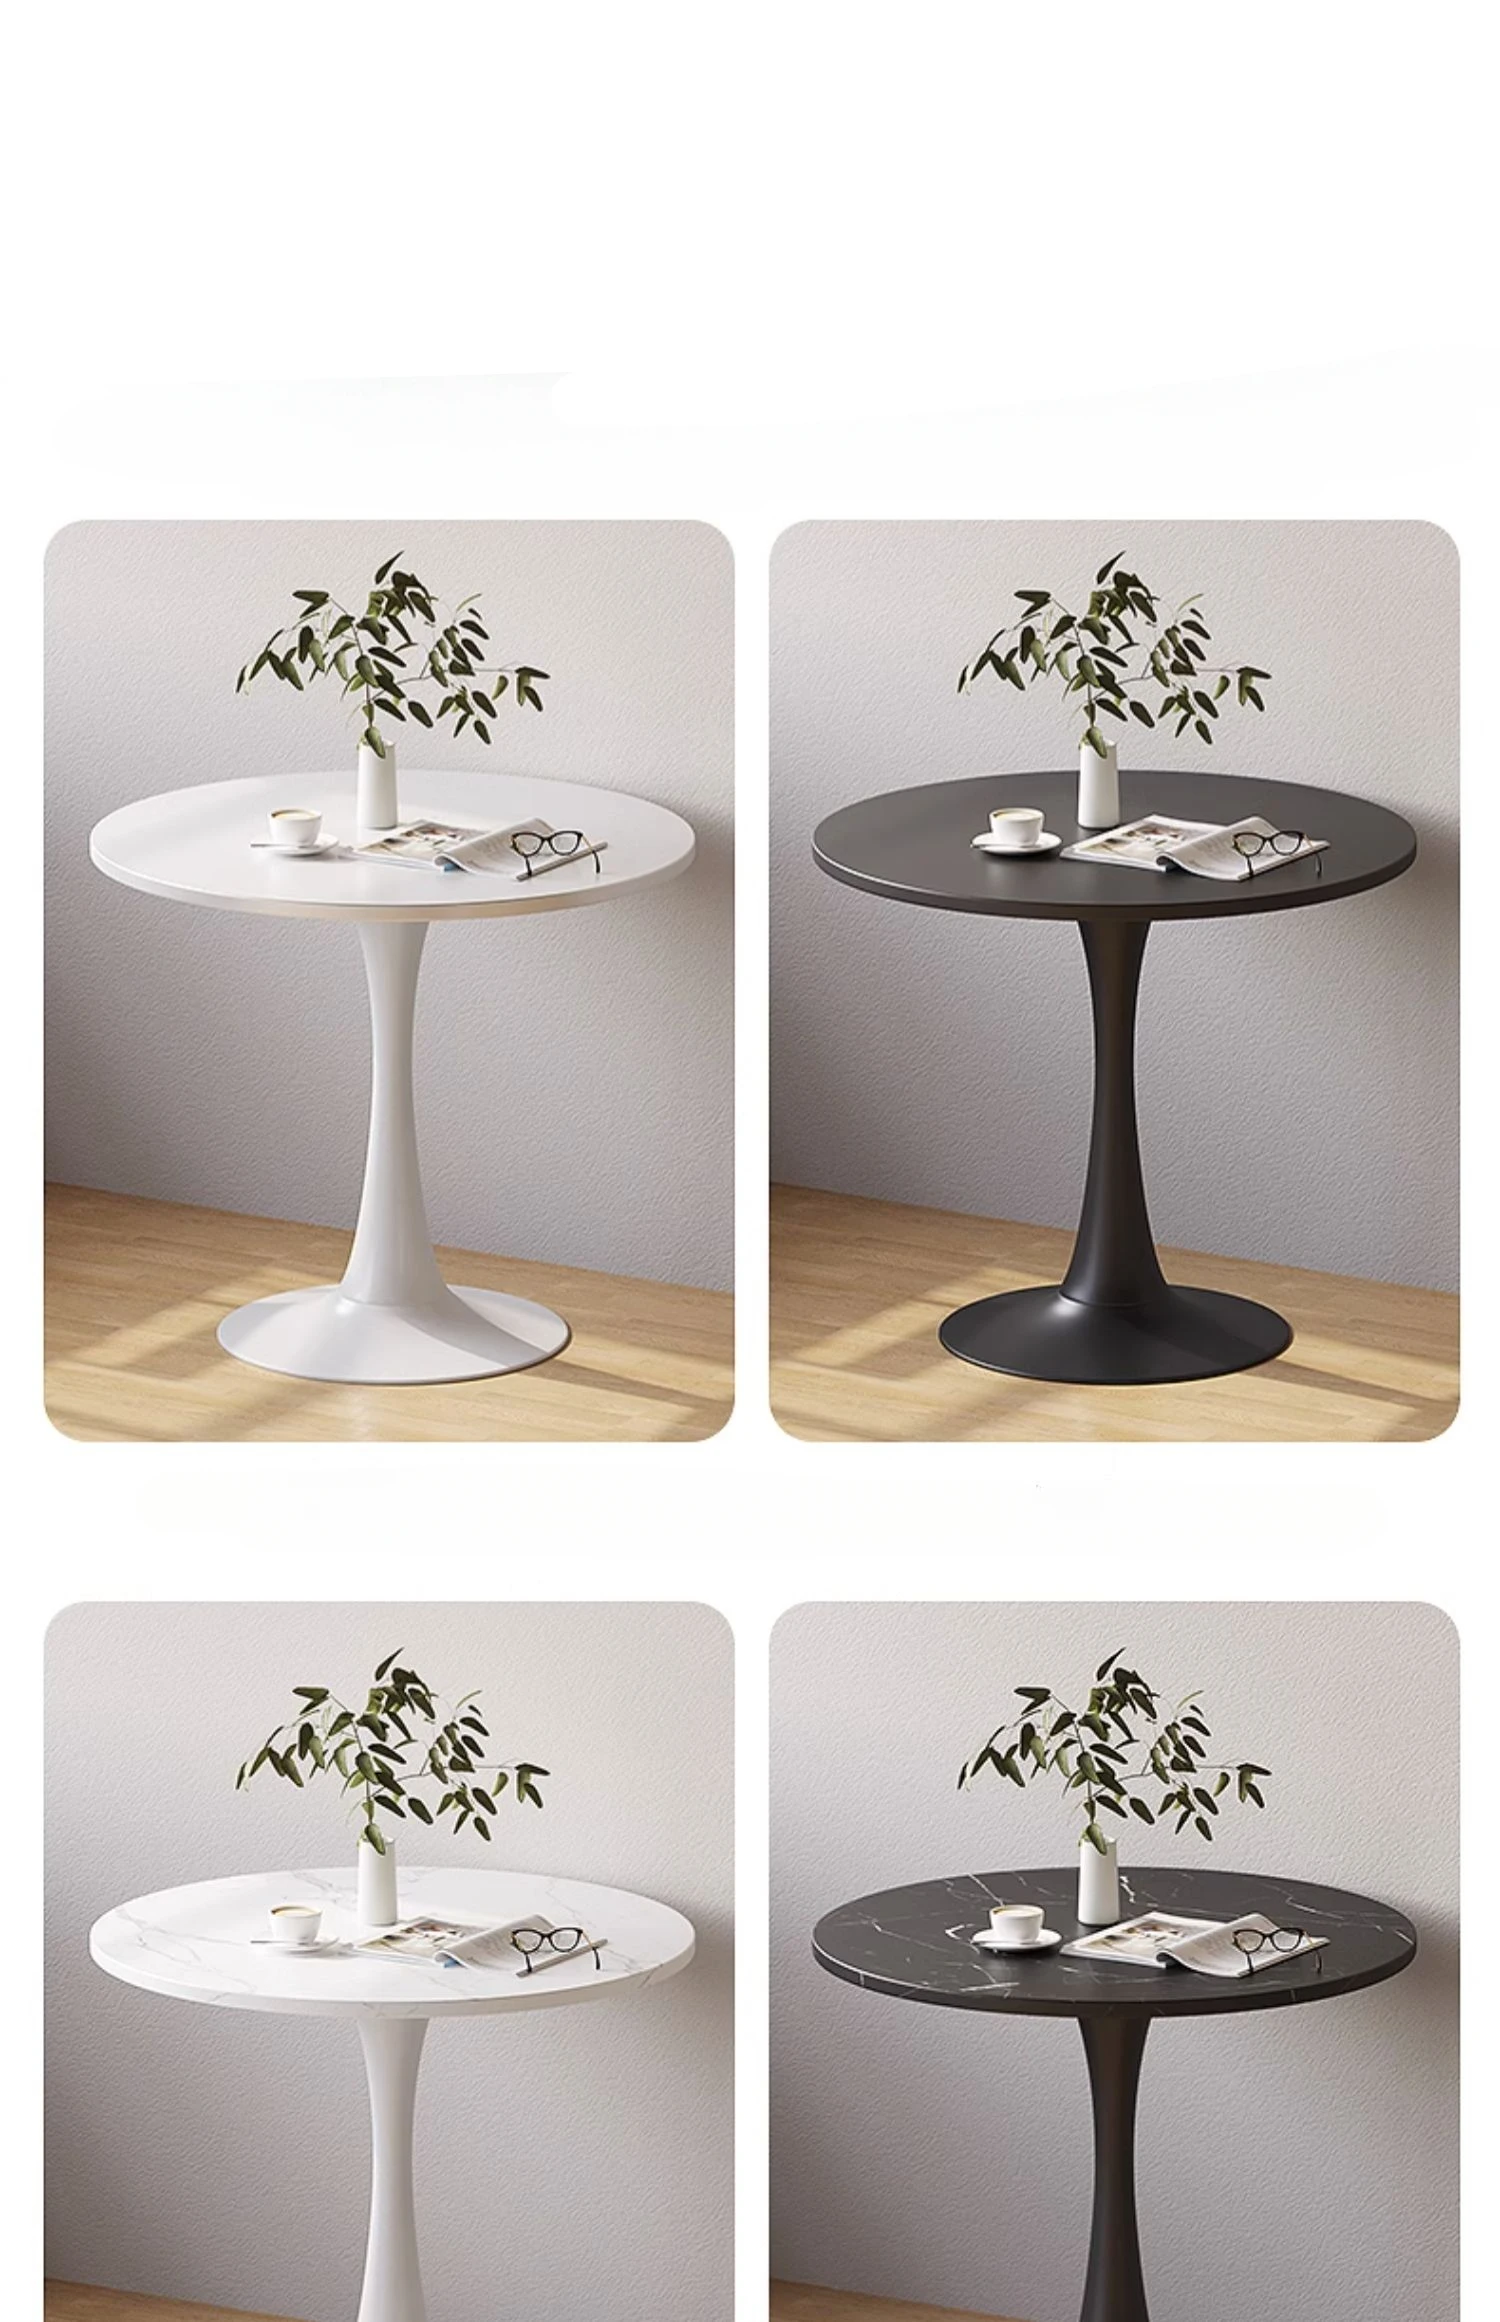 Round Table Household Dining Table Small Unit Type Desk Dual-purpose Fast Food Restaurant Commercial Rental Room Nordic